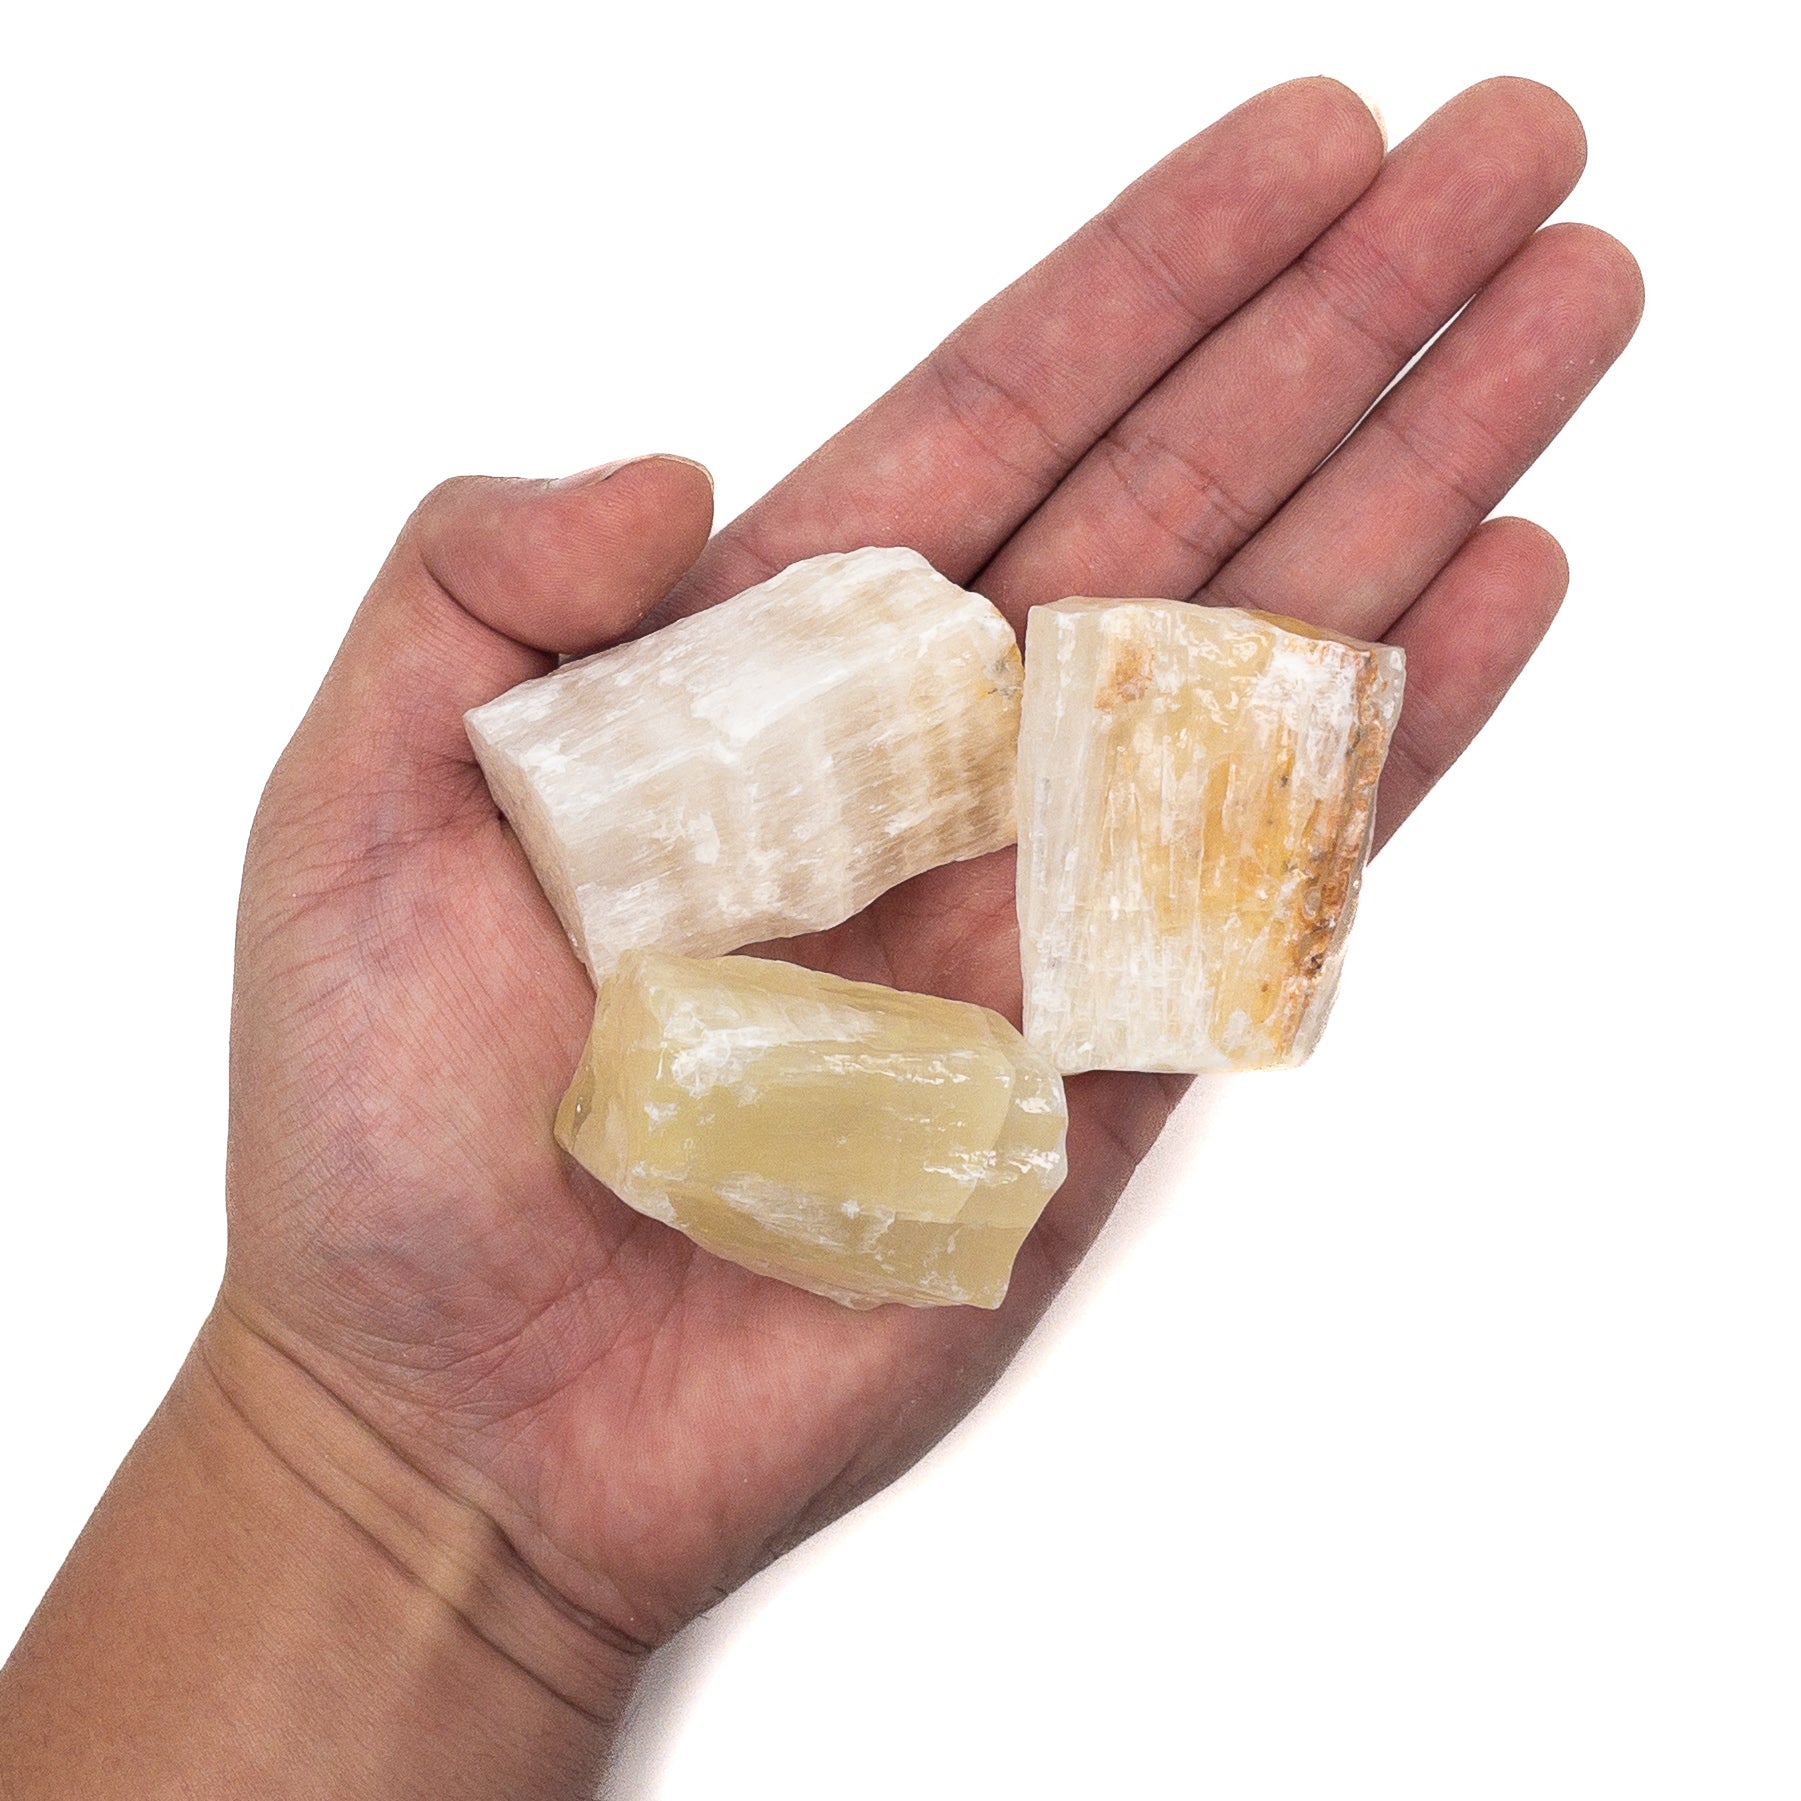 Pick Your Own Pineapple (Yellow) Calcite Chunky Rough Specimen - 1 pc.